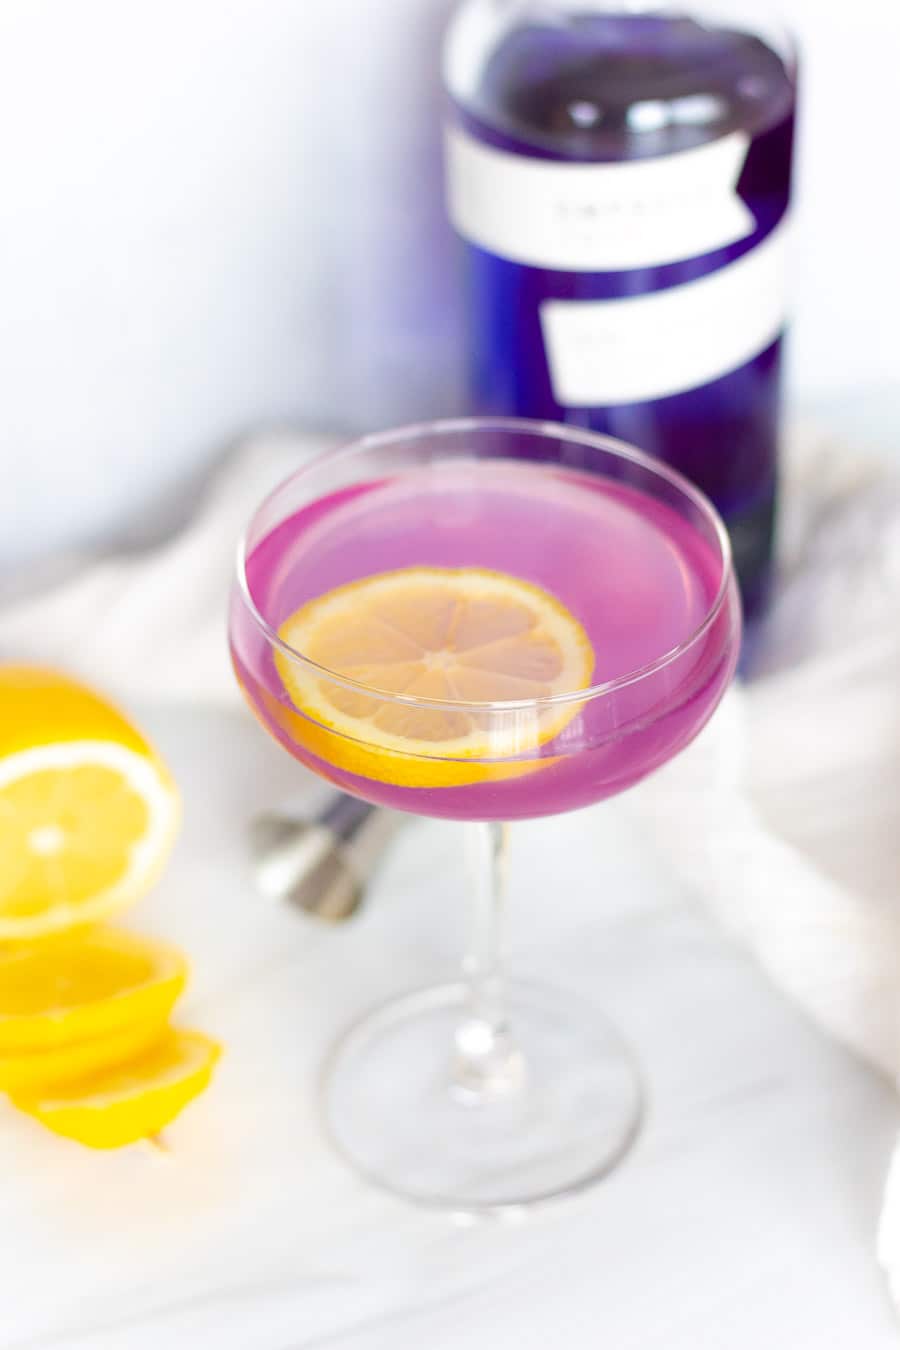 This Bee's Knees Cocktail recipe is one of my favorite classic gin cocktails! This is one of my favorite Empress Gin cocktail recipes.